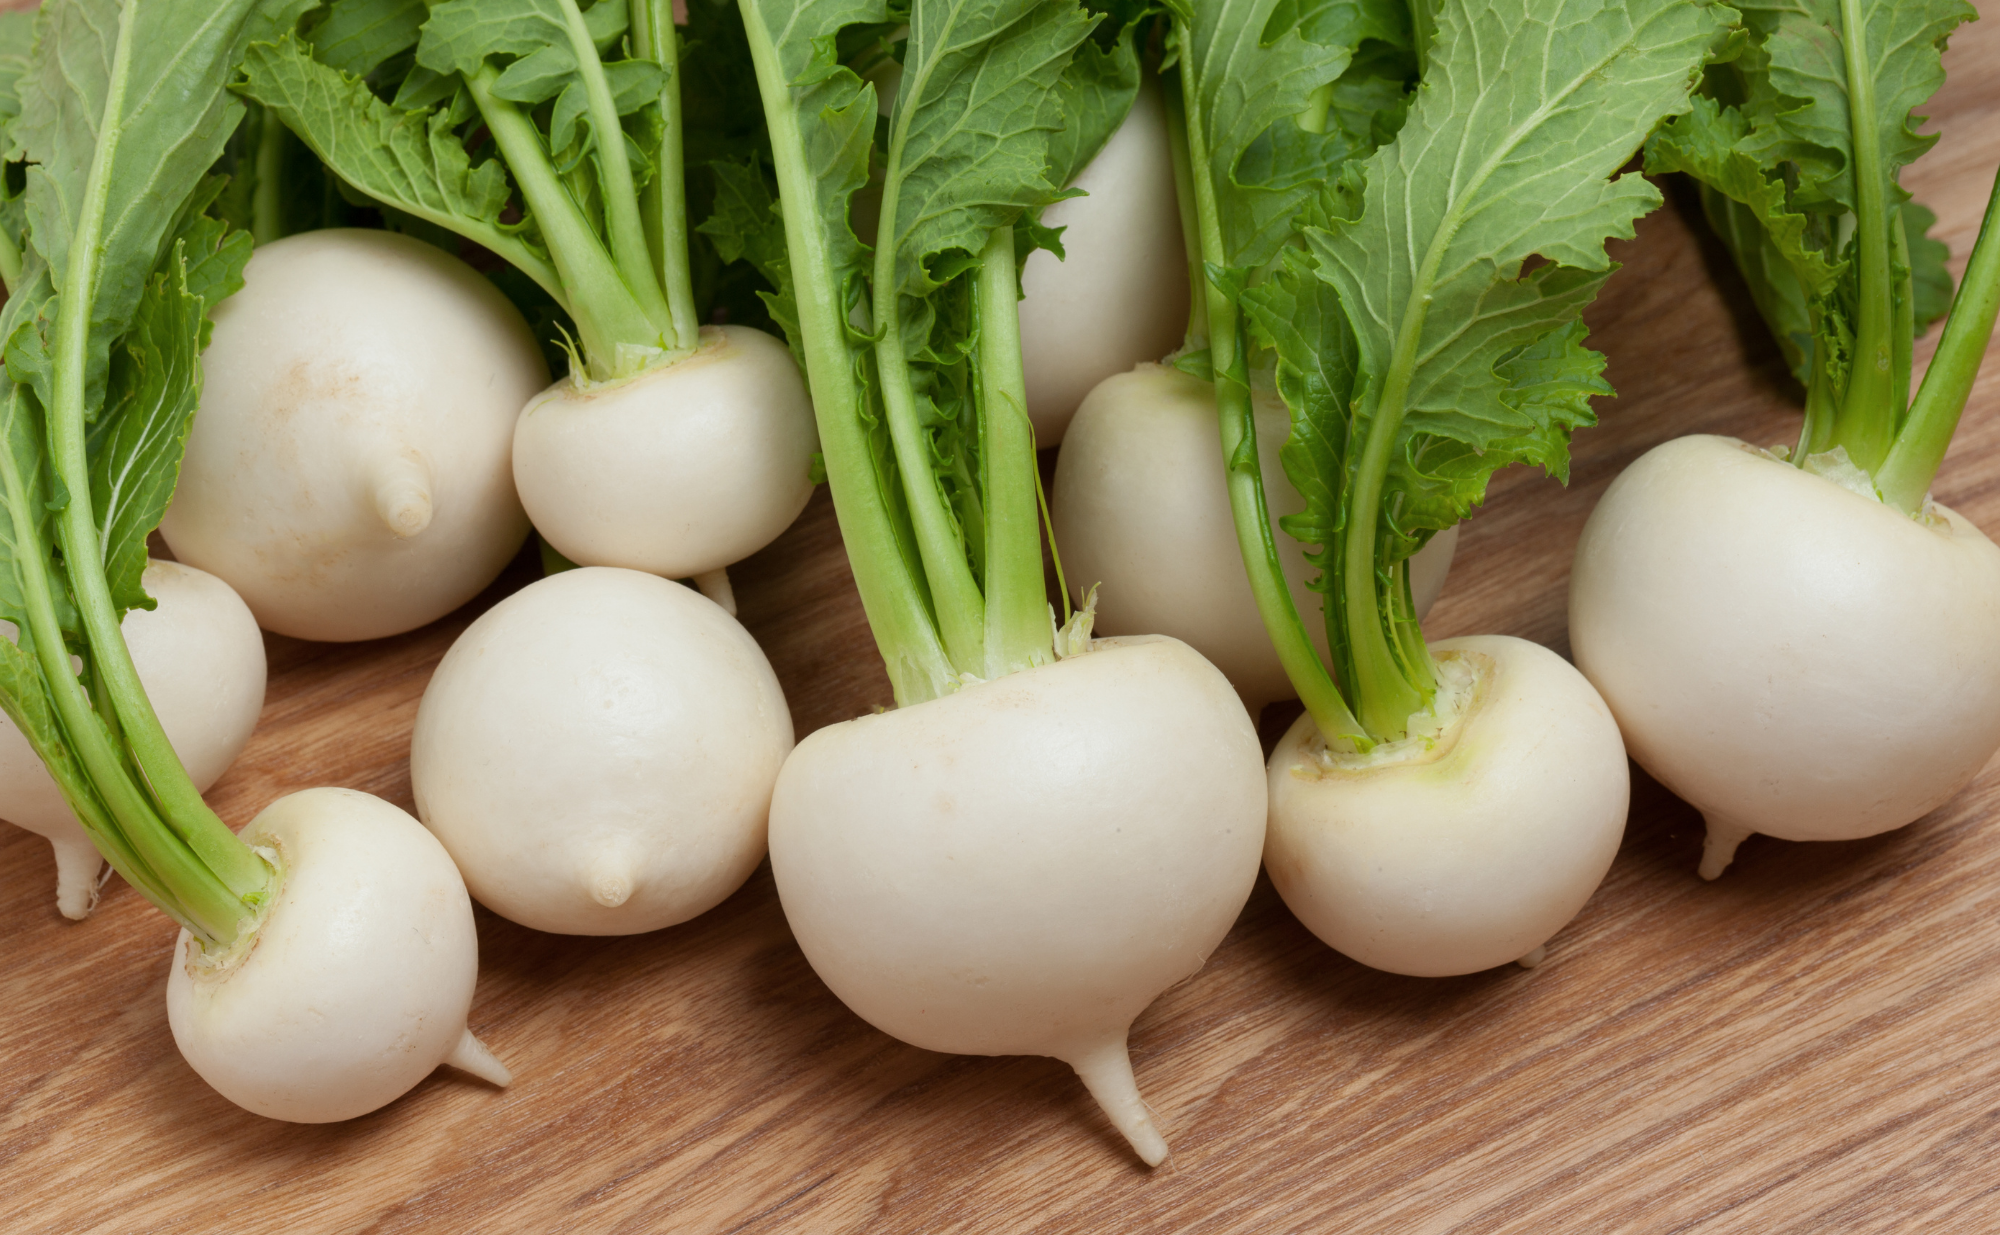 The Turnip Defense As A Substitute for Bankruptcy